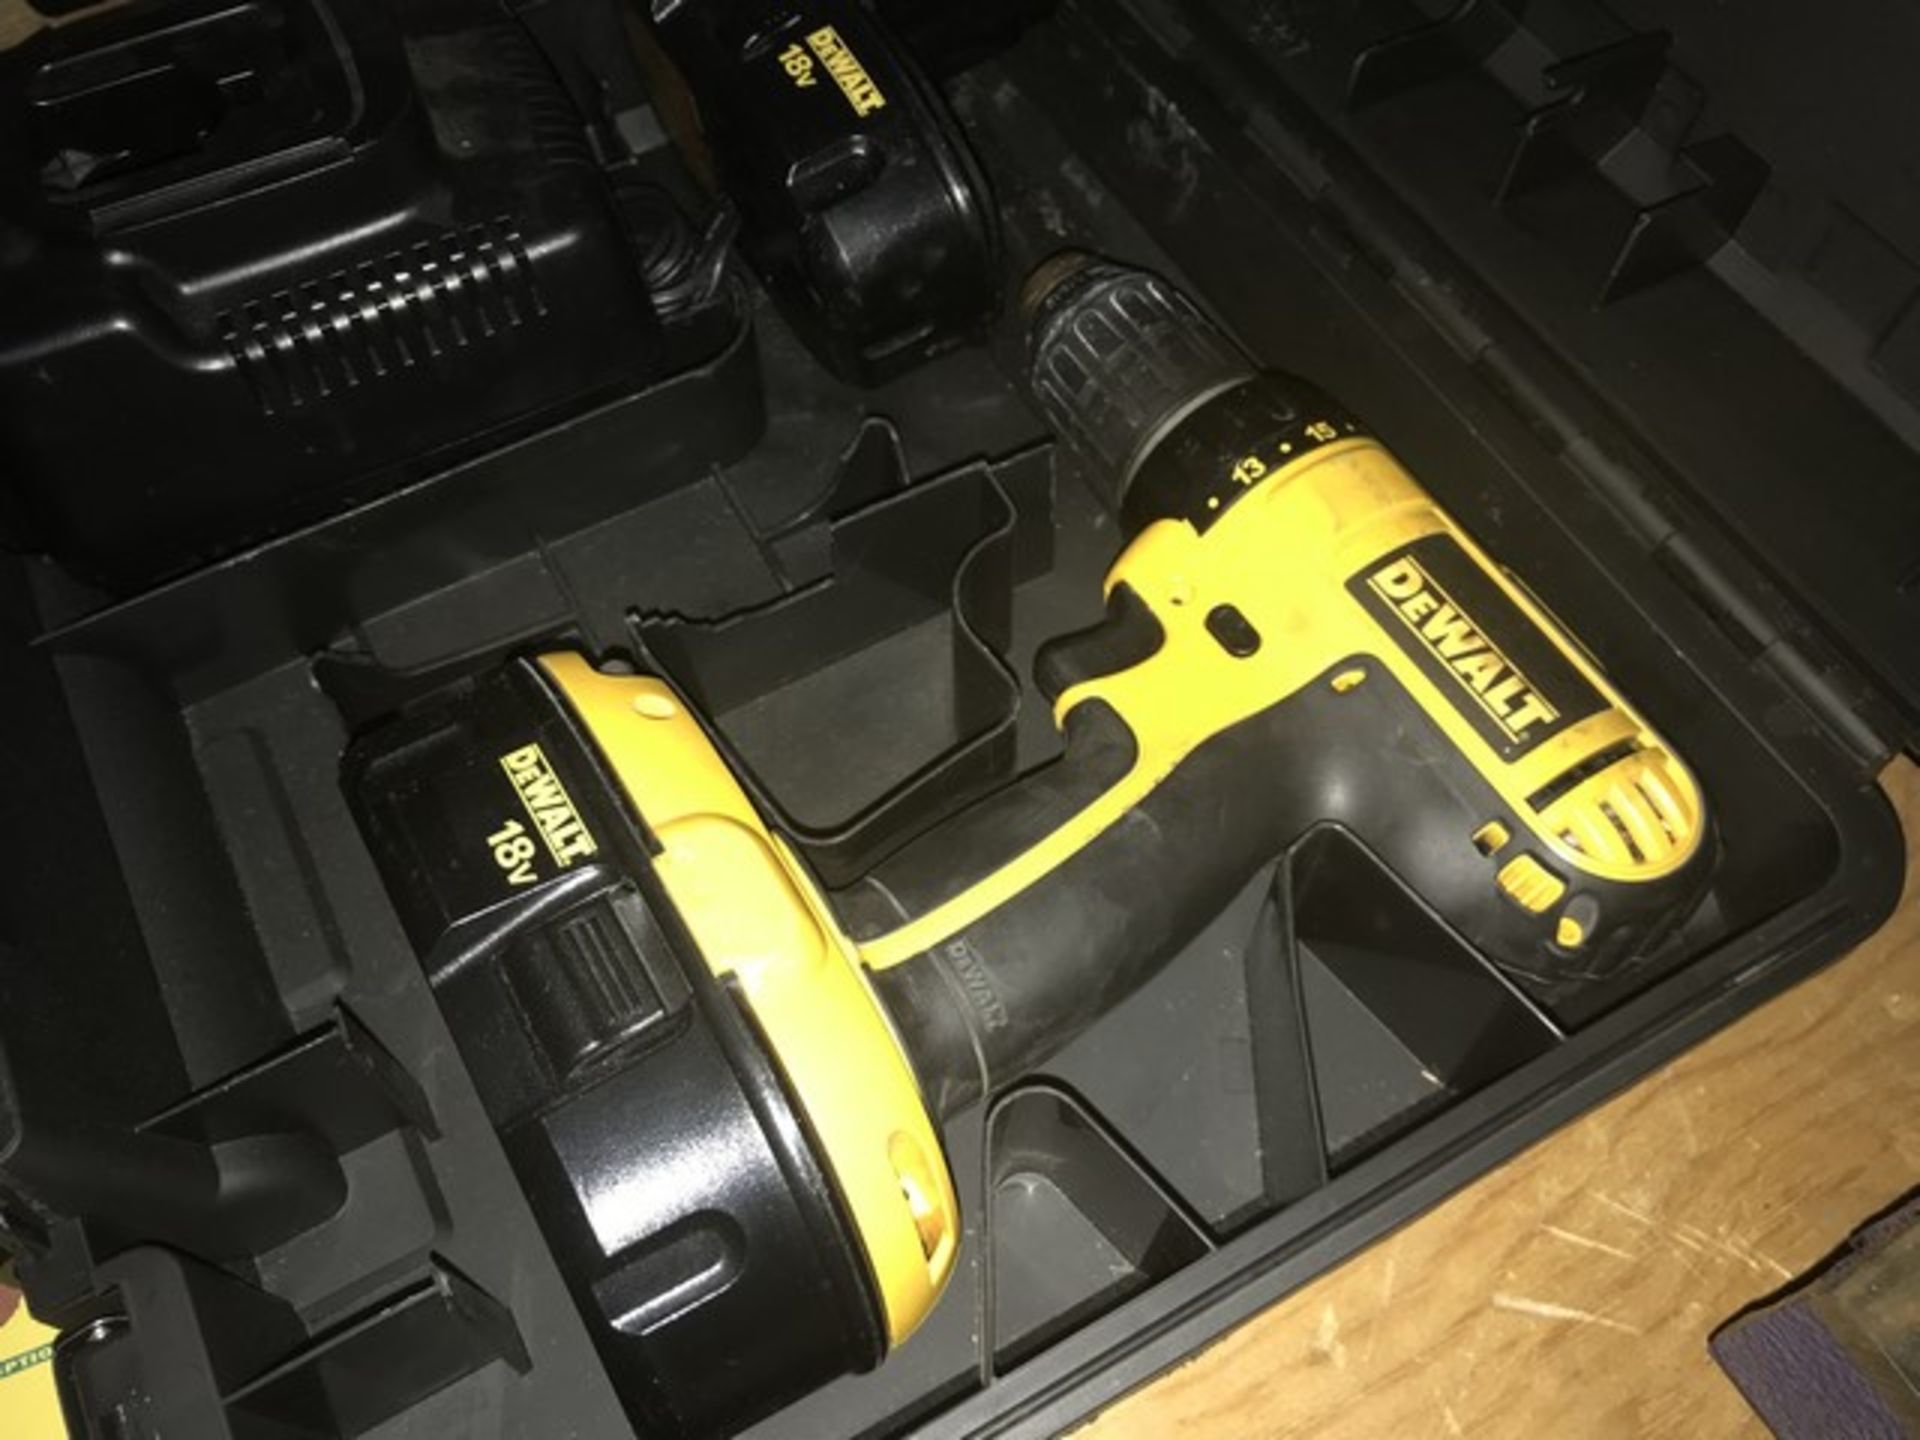 DEWALT DC720 18V CORDLESS DRILL WITH CHARGER & CASE - Image 2 of 2